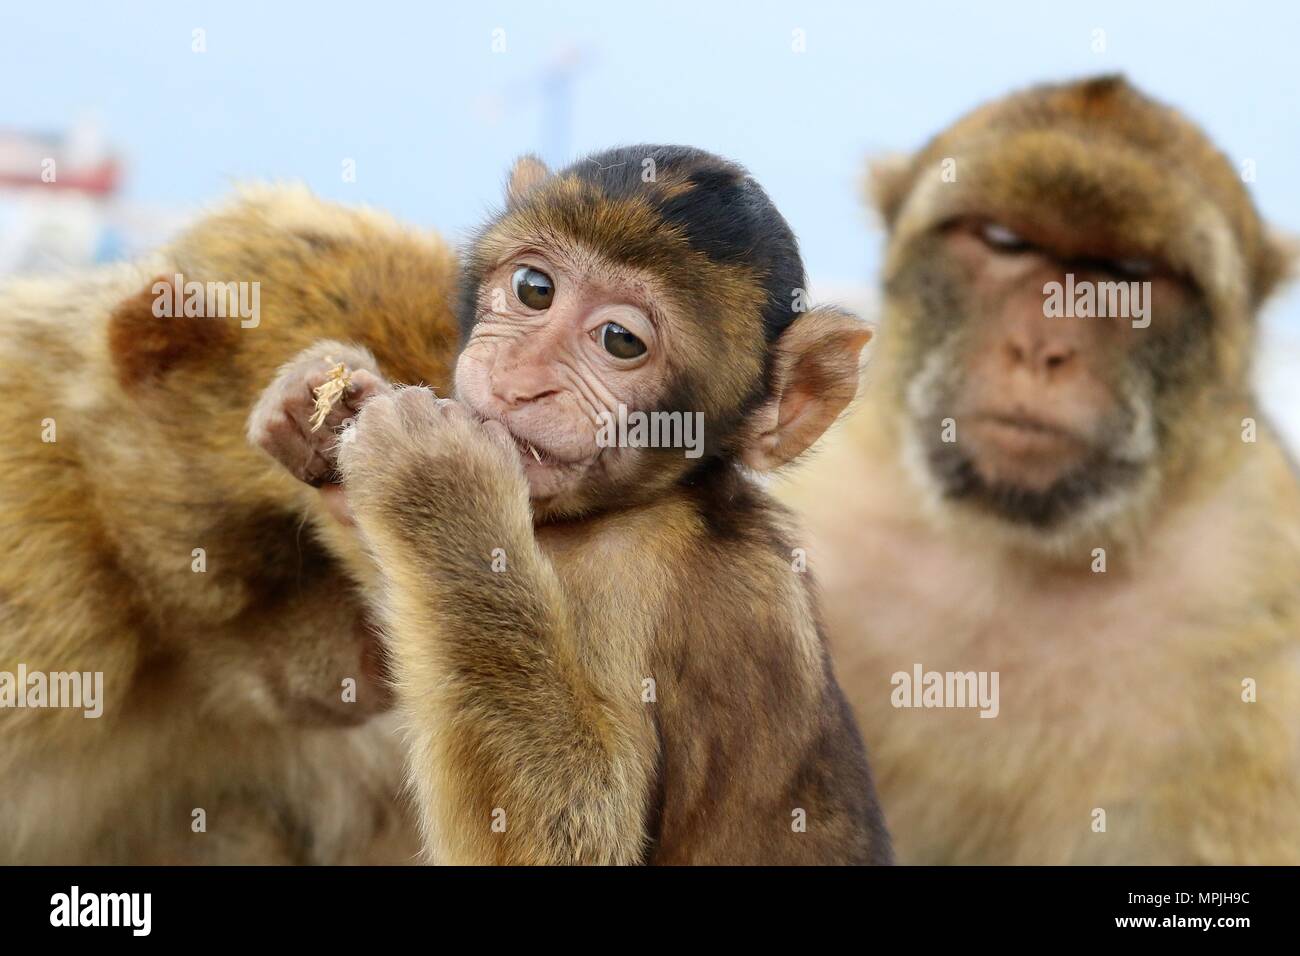 The Barbary Apes of The Rock of Gibraltar. The Barbary Macaque population in Gibraltar is the only wild monkey population in the European continent. Stock Photo